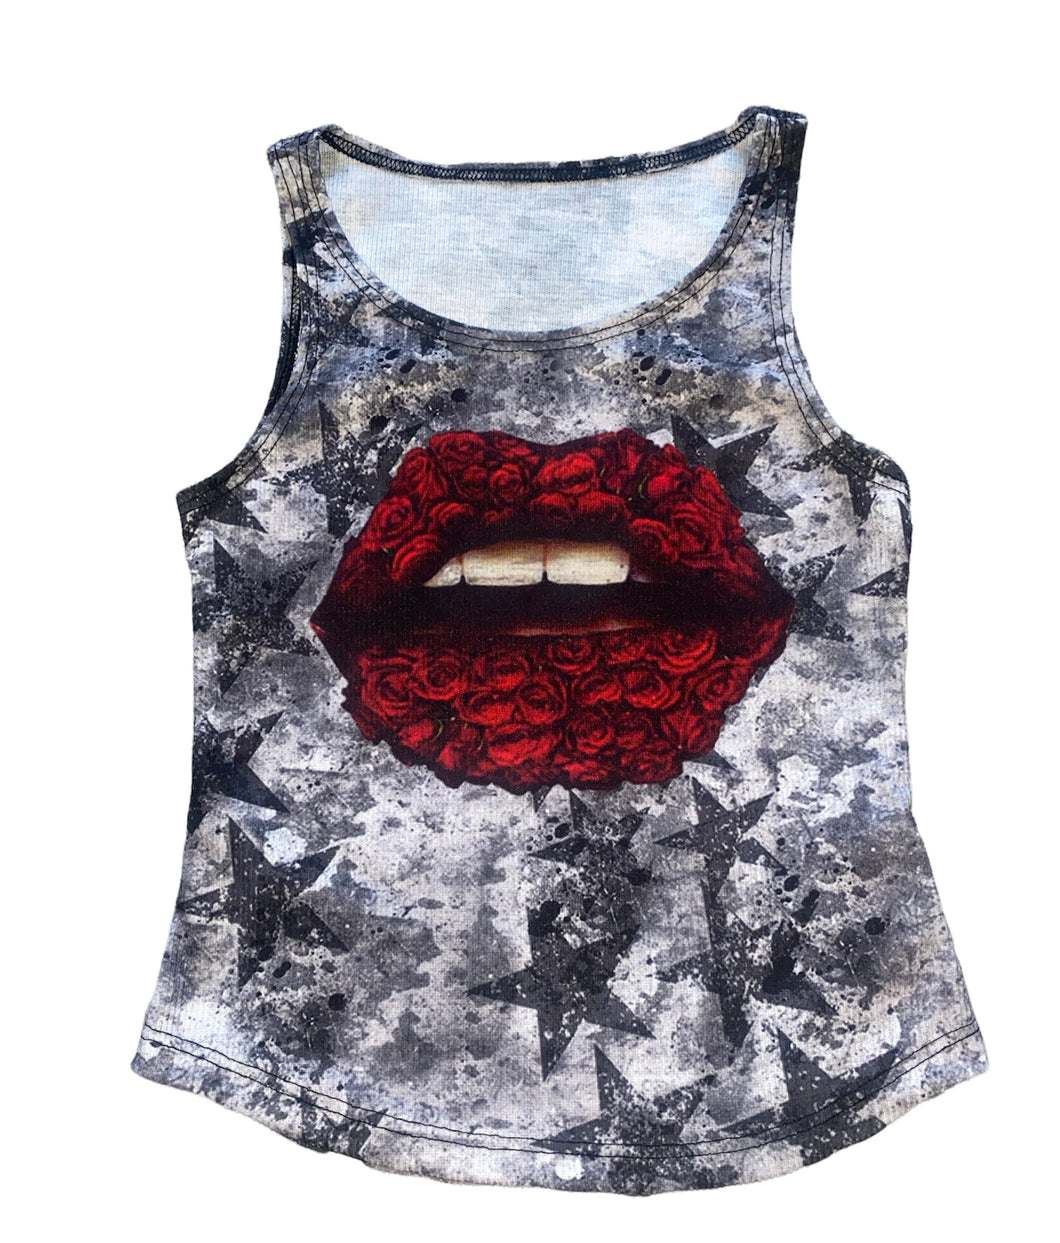 Penelope Wildberry girls grunge stars and rose lips ribbed tank top 6 NEW